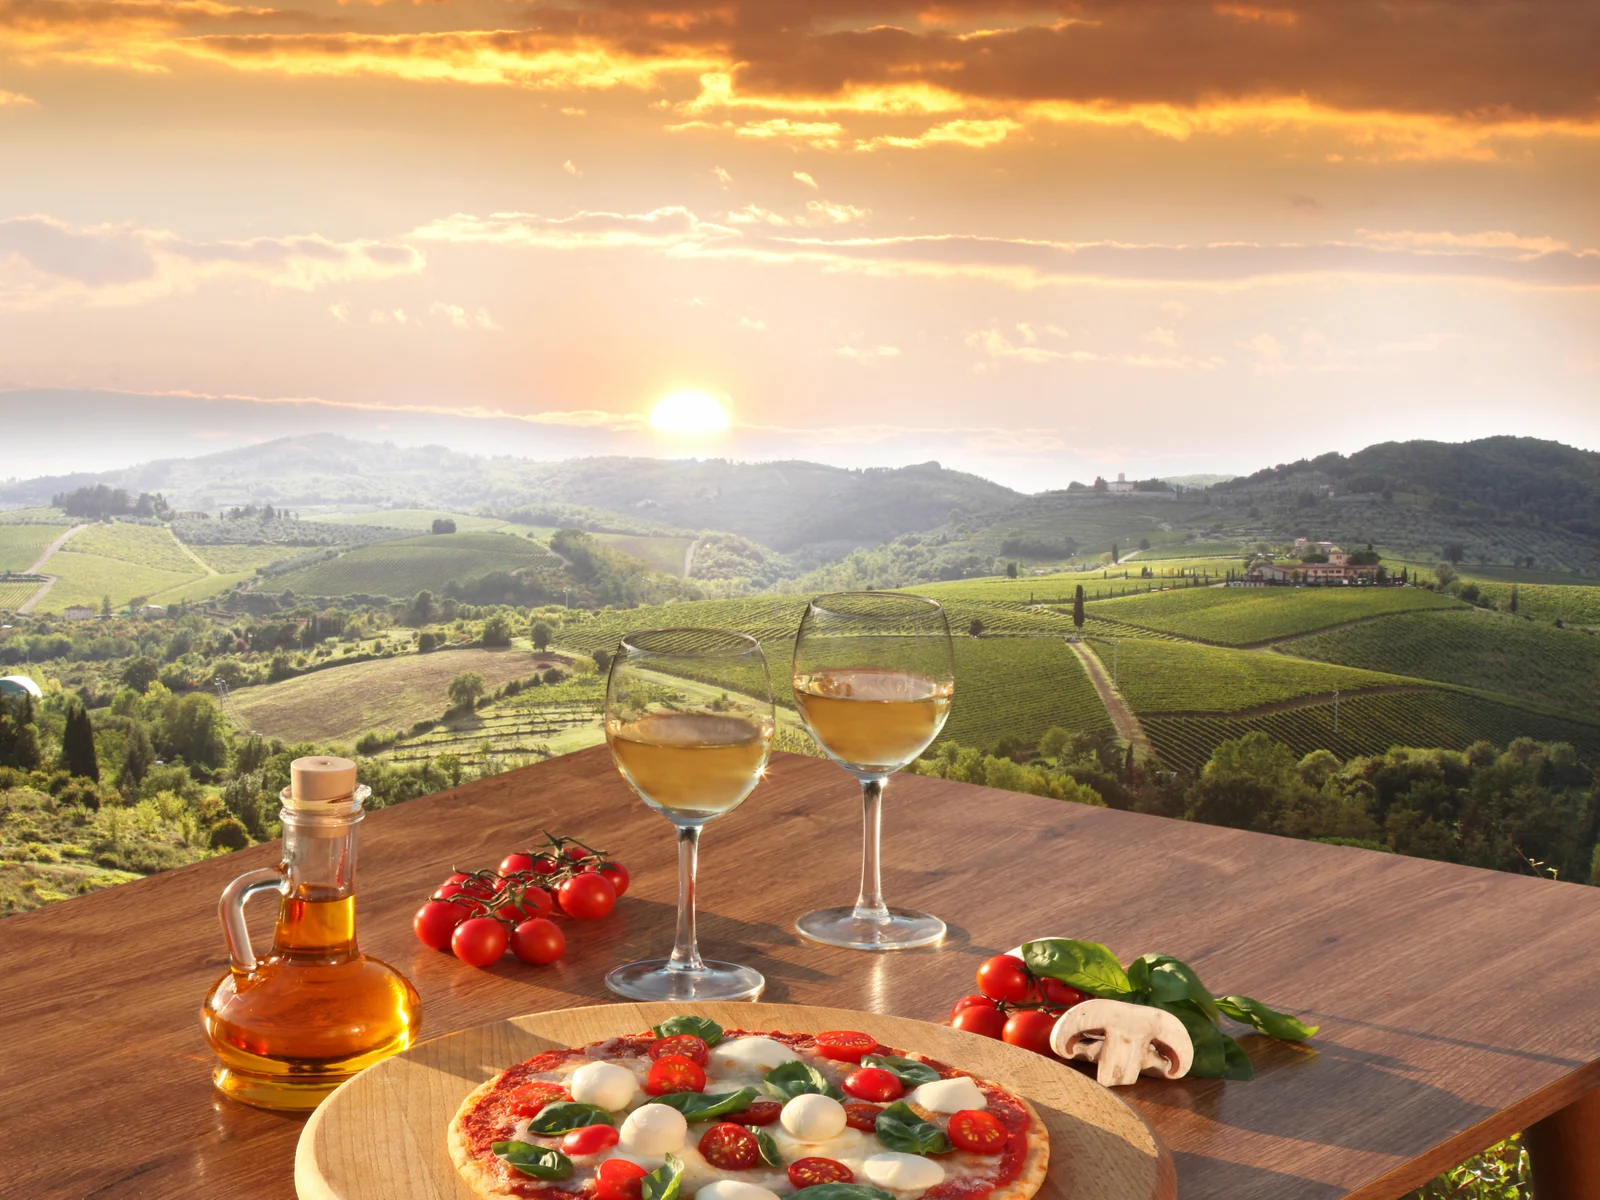 Wine glasses and appetizers overlook a gorgeous vineyard during the best time to visit Italy